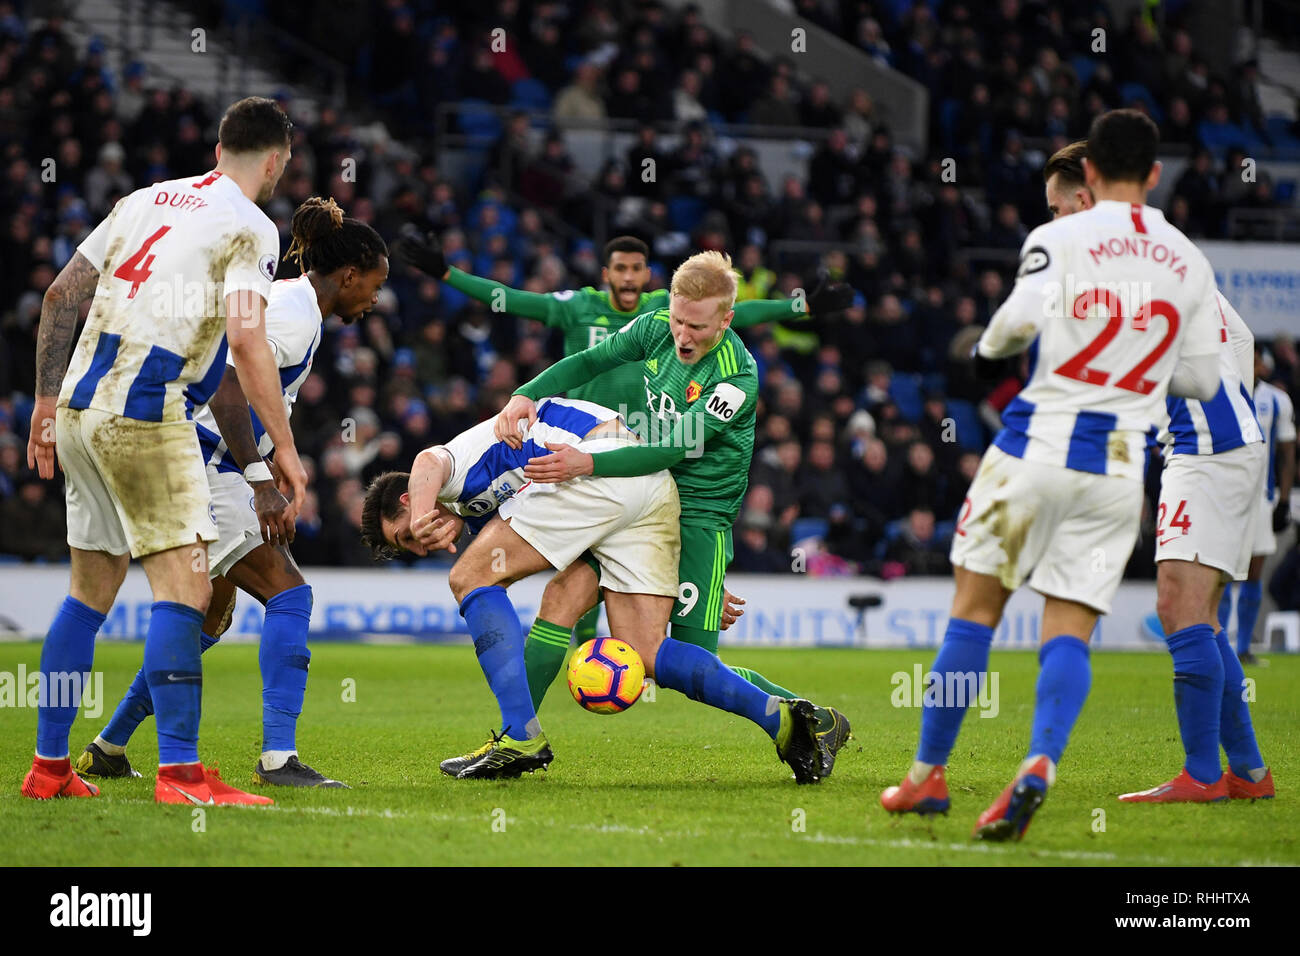 Will Hughes of Watford and Lewis Dunk of Brighton & Hove Albion battle for the ball - Brighton & Hove Albion v Watford, Premier League, Amex Stadium, Brighton - 2nd February 2019  Editorial Use Only - DataCo restrictions apply Stock Photo